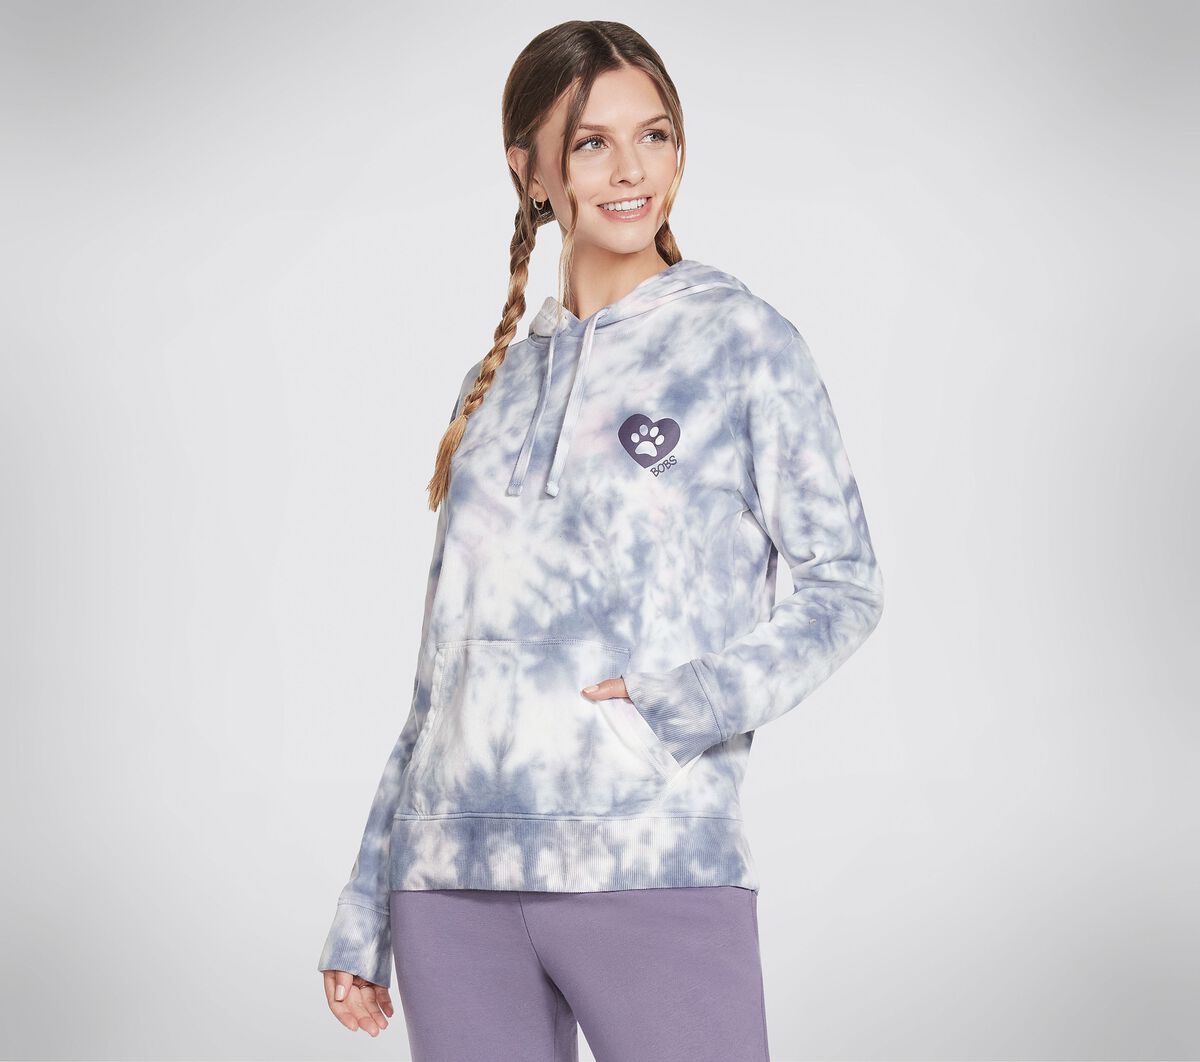 Personalized Tie Dye Hooded Sweatshirt With Front Pocket -  Israel